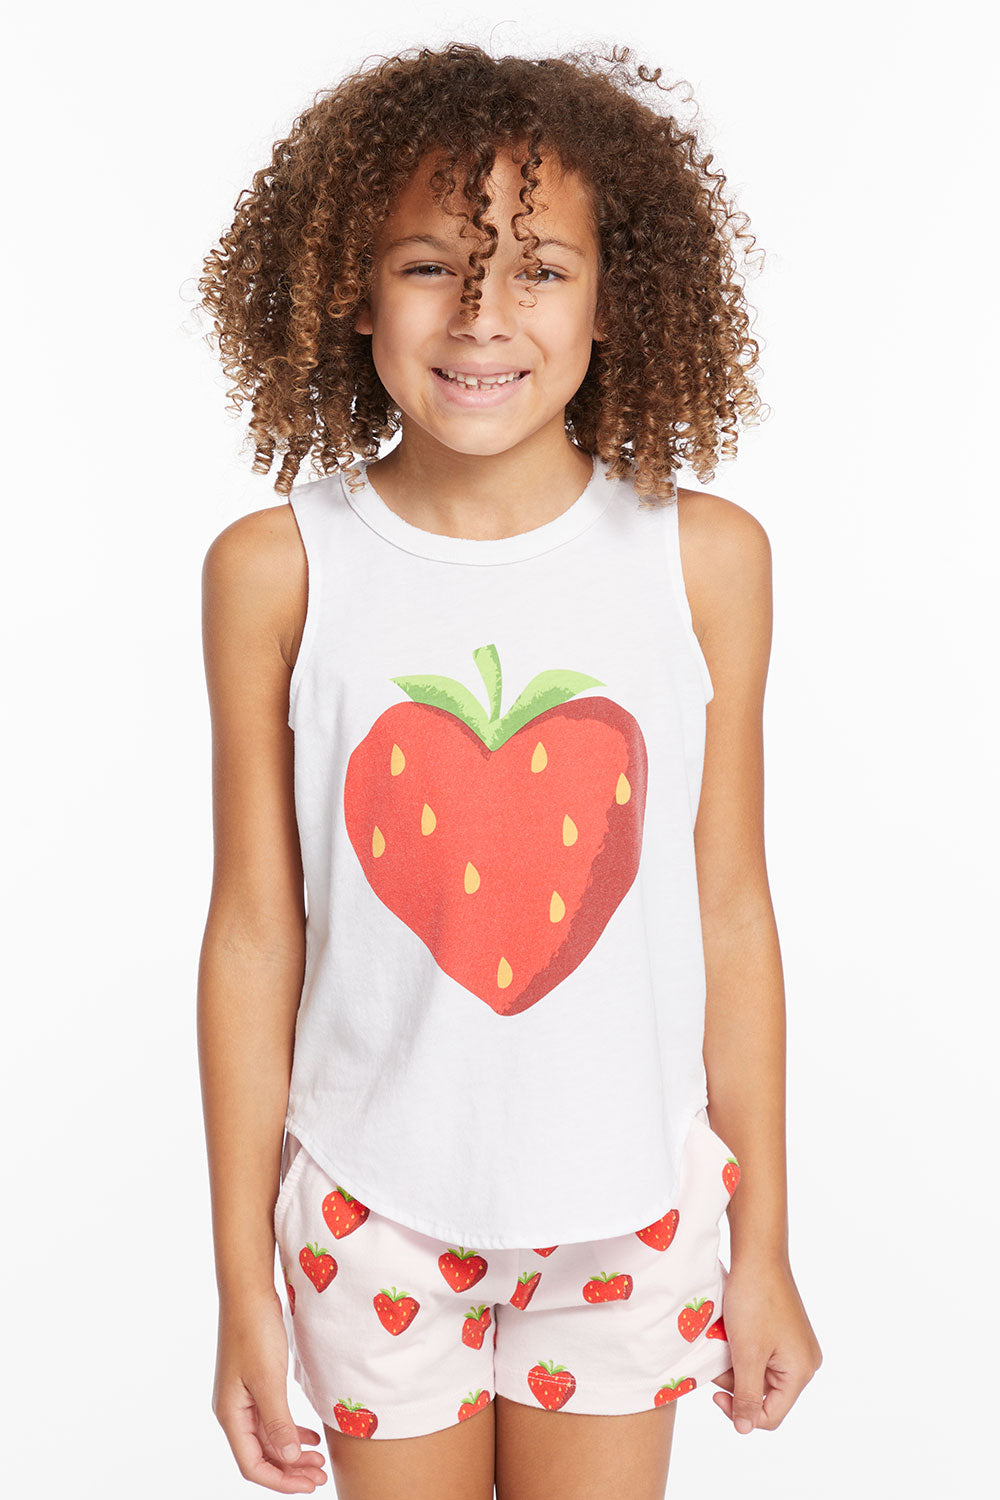 Heart Strawberry Girls Vintage Jersey Shirttail Muscle GIRLS chaserbrand